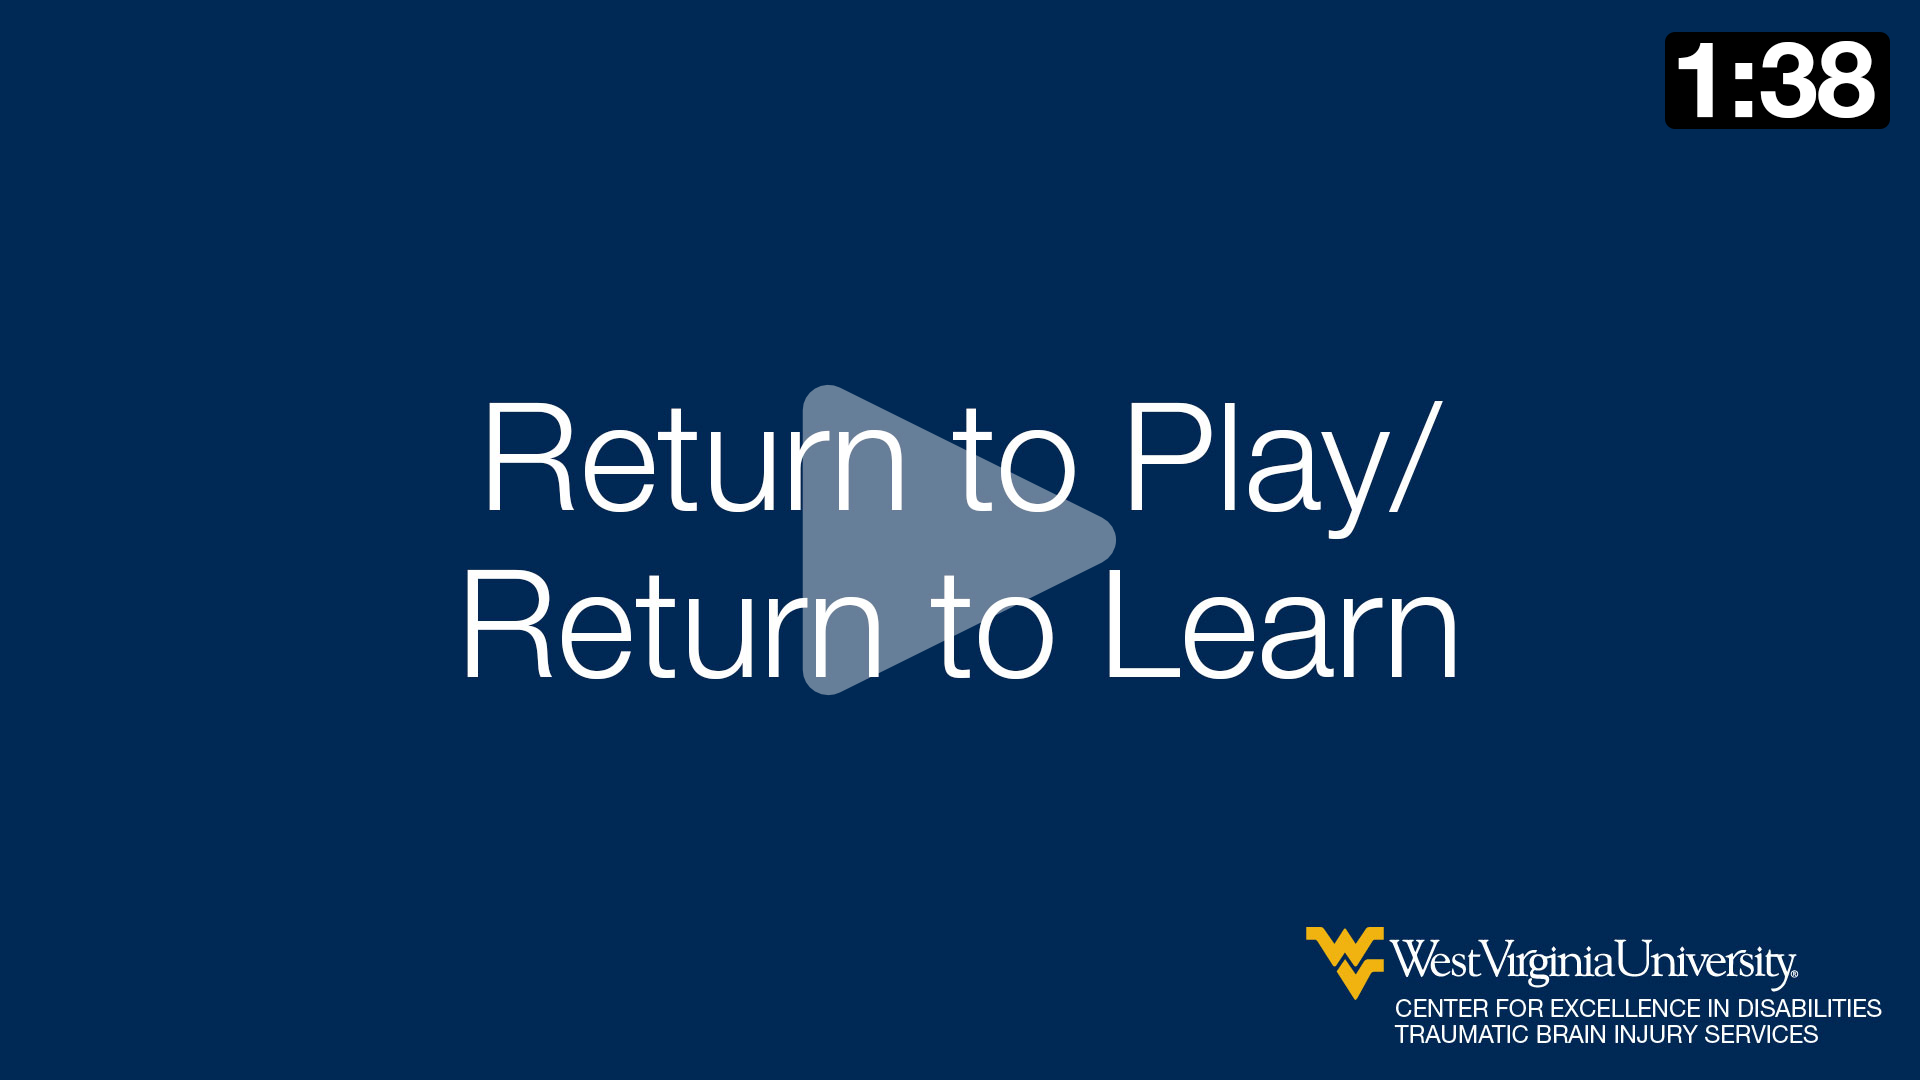 Nick Davidson talks about return to play/return to learn.